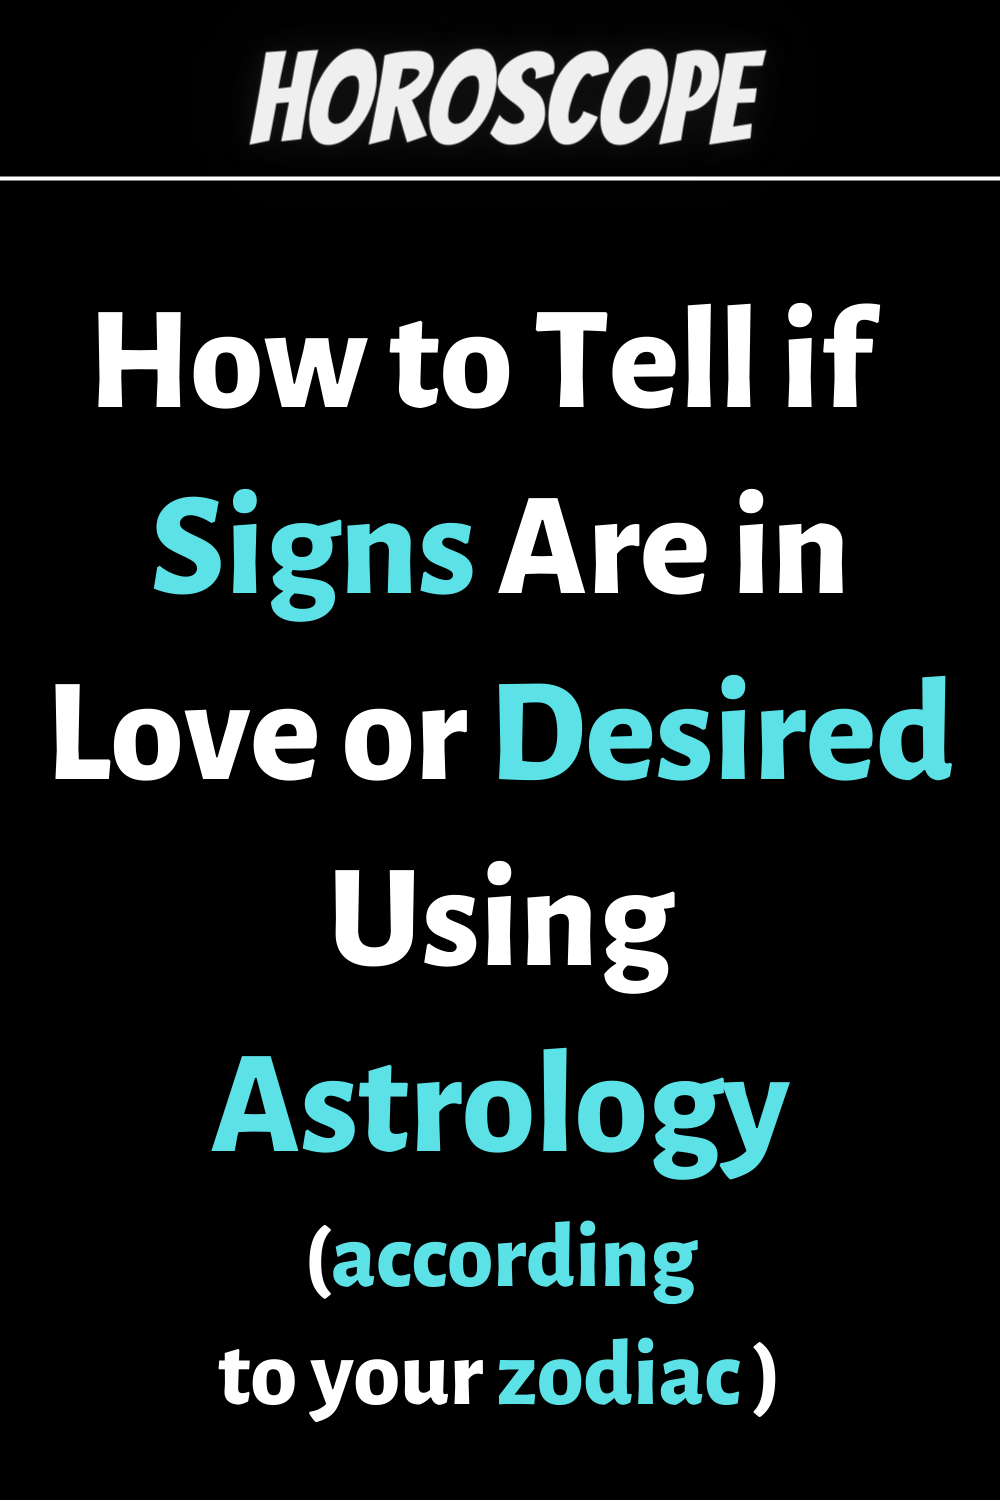 How to Tell if Zodiac Signs Are in Love or Desired Using Astrology ...